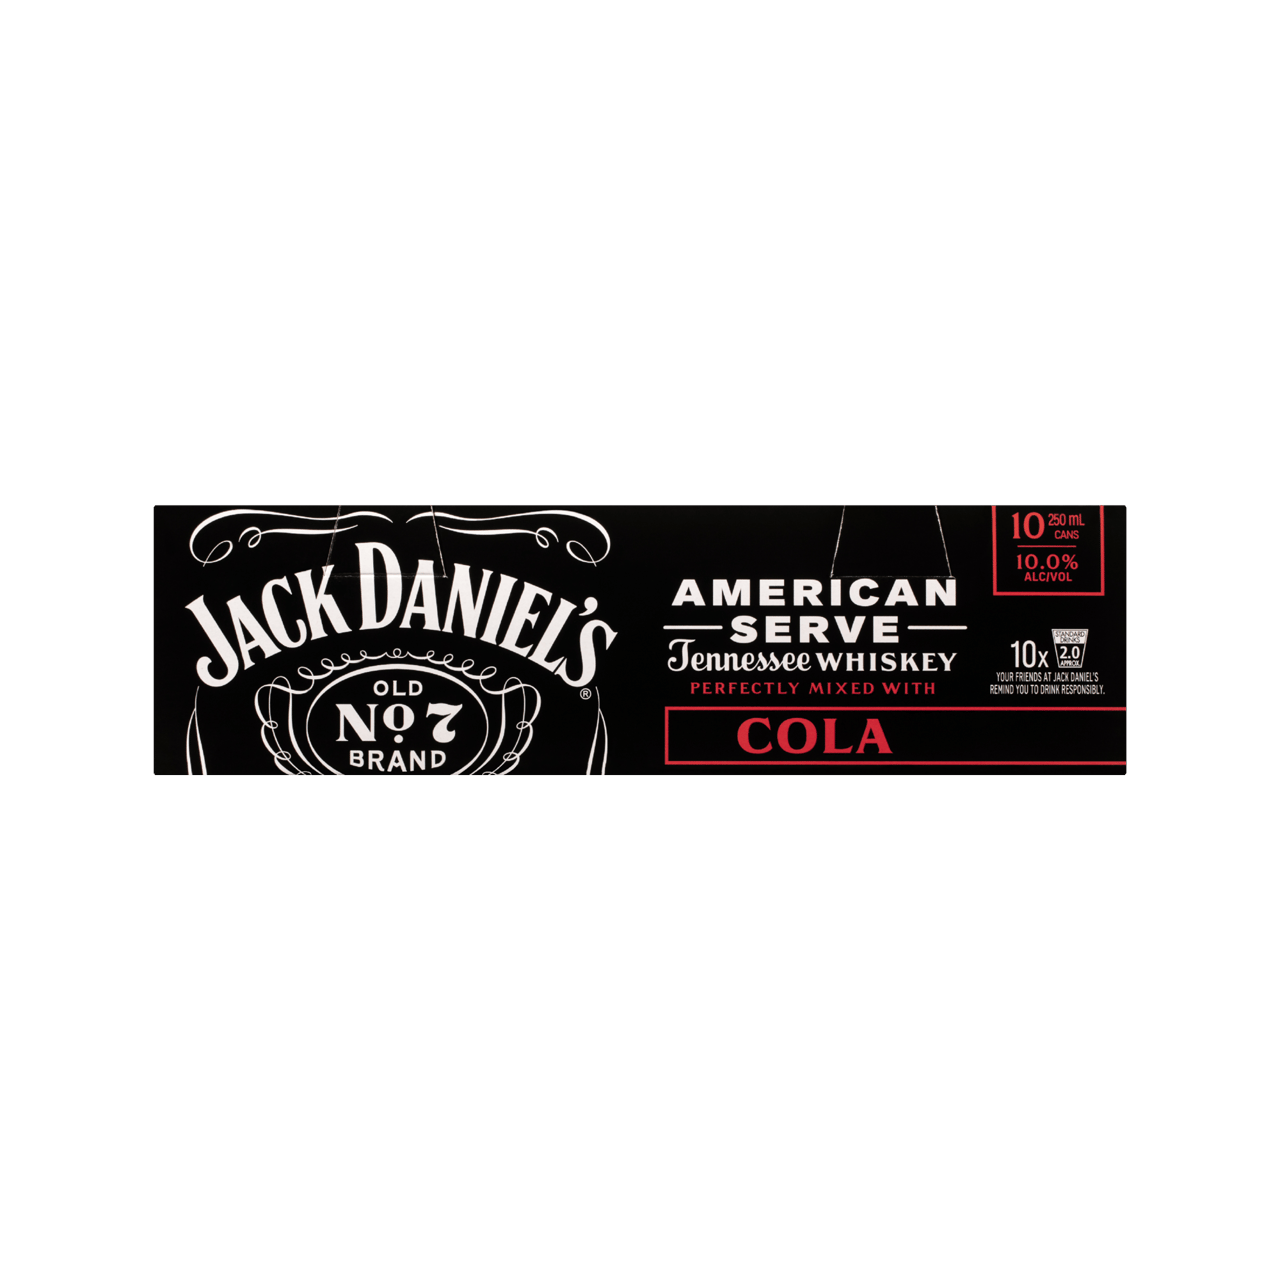 Jack Daniel's Tennessee Whiskey American Serve & Cola 10% 10 Pack Cans 250ml